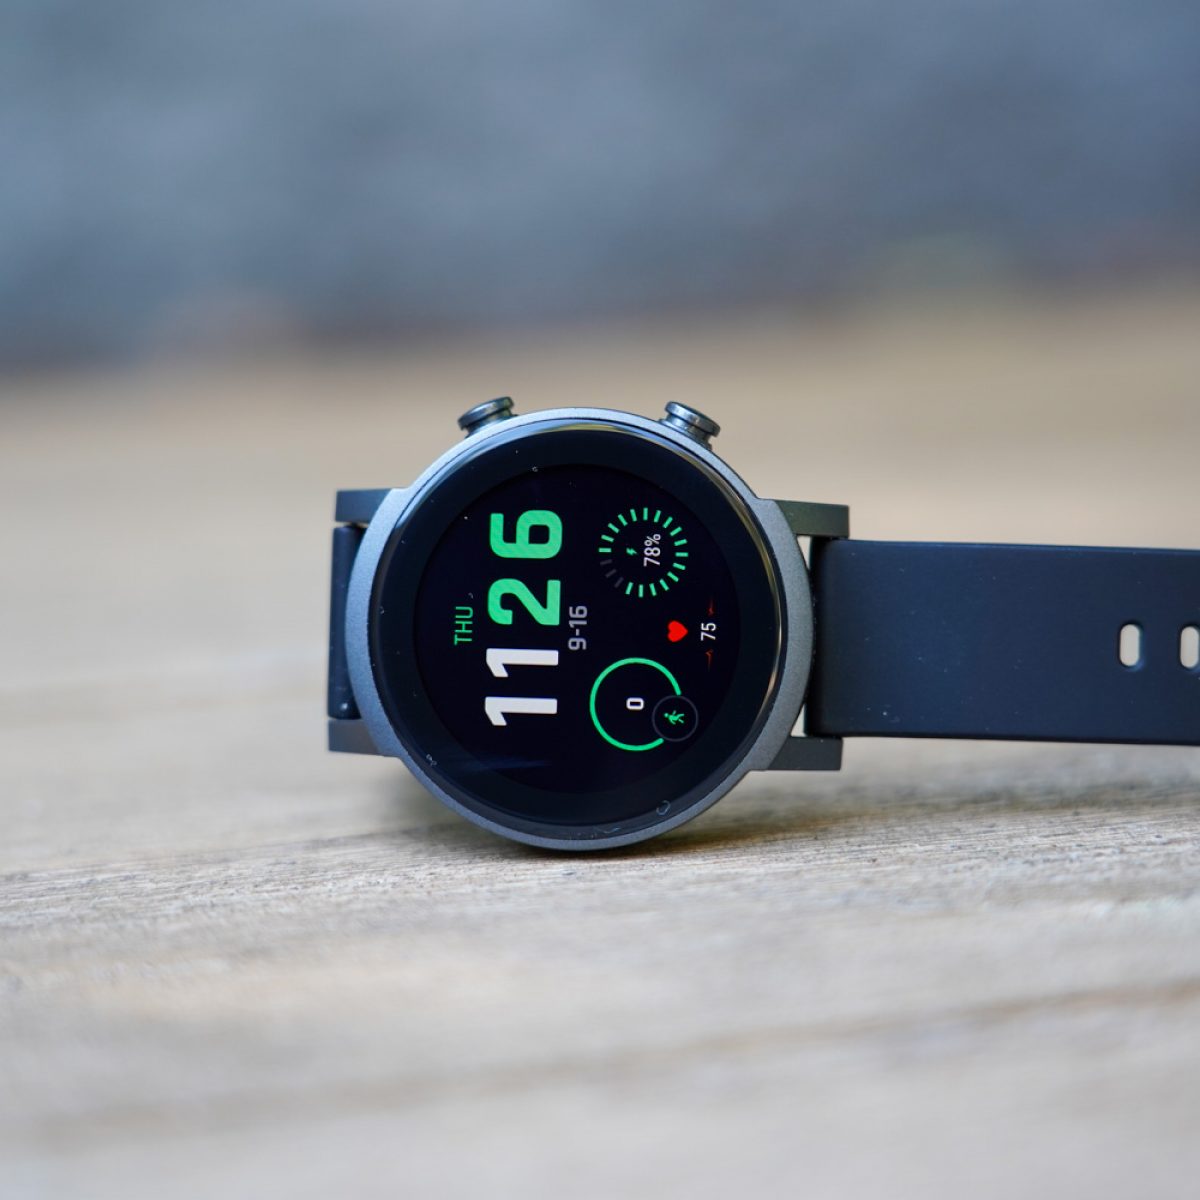 TicWatch E3 launches w/ Wear 4100, Wear OS, $199 price - 9to5Google